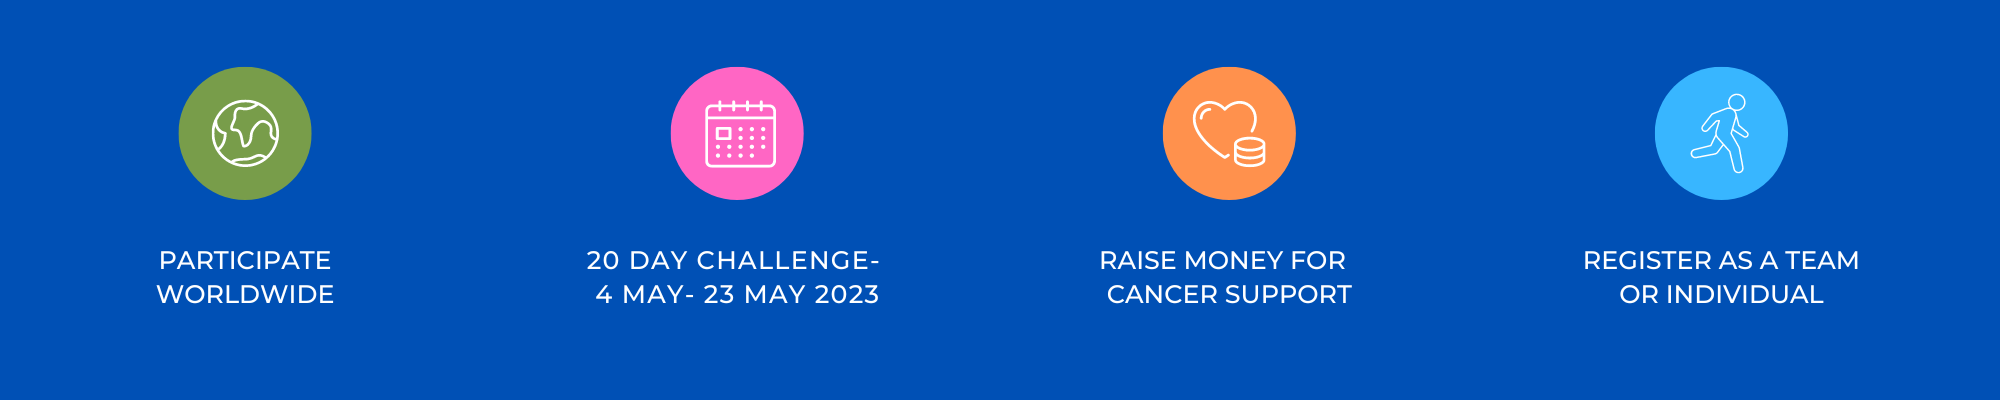 image with four icons and information about Steps for CancerSupport